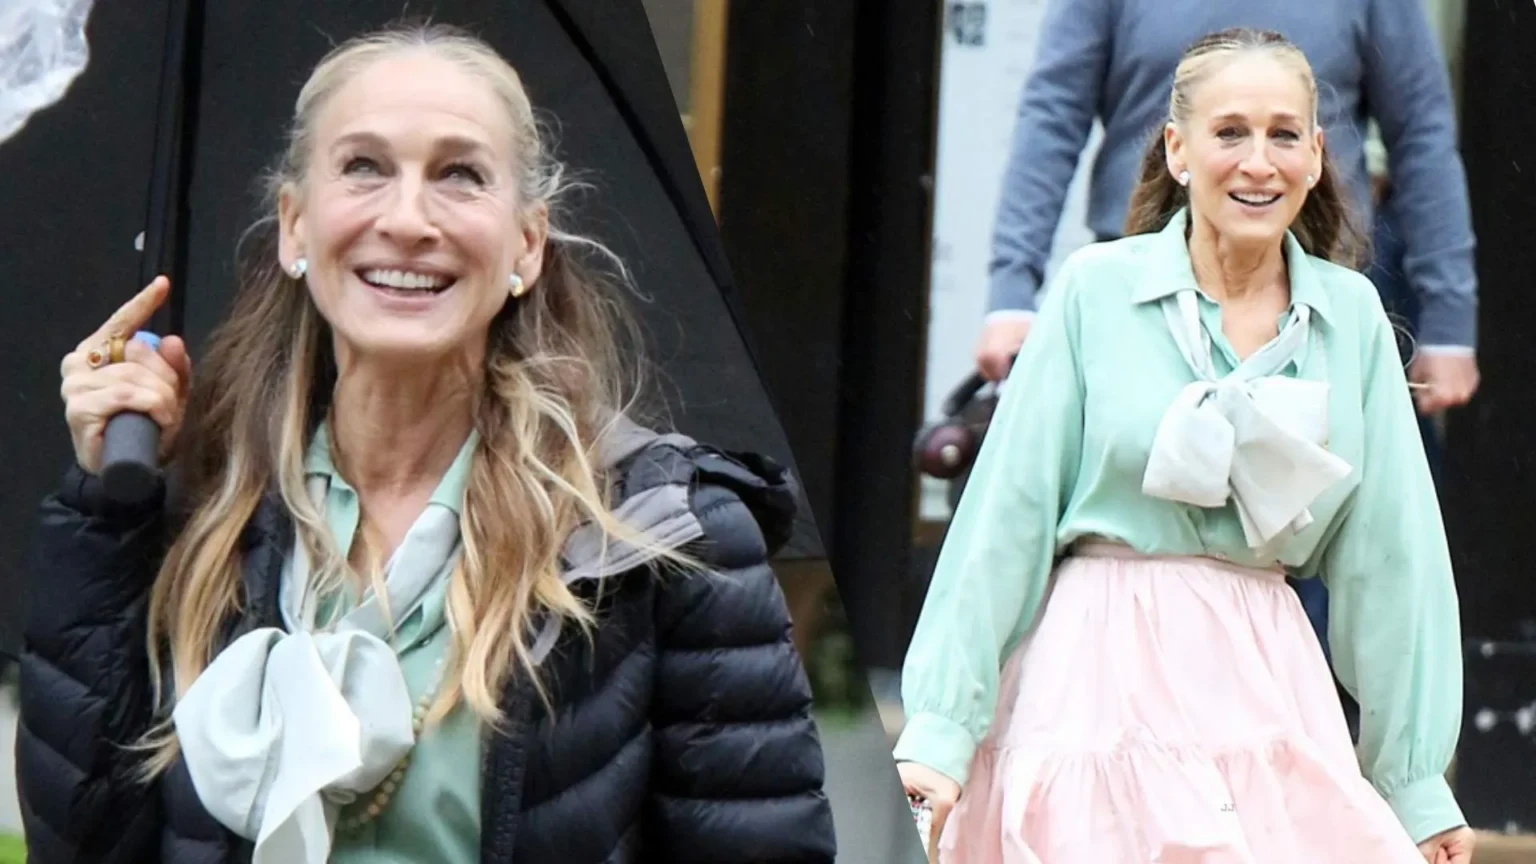 And Just Like That Season 3 Begins Filming_ Sarah Jessica Parker Spotted on Set (2)